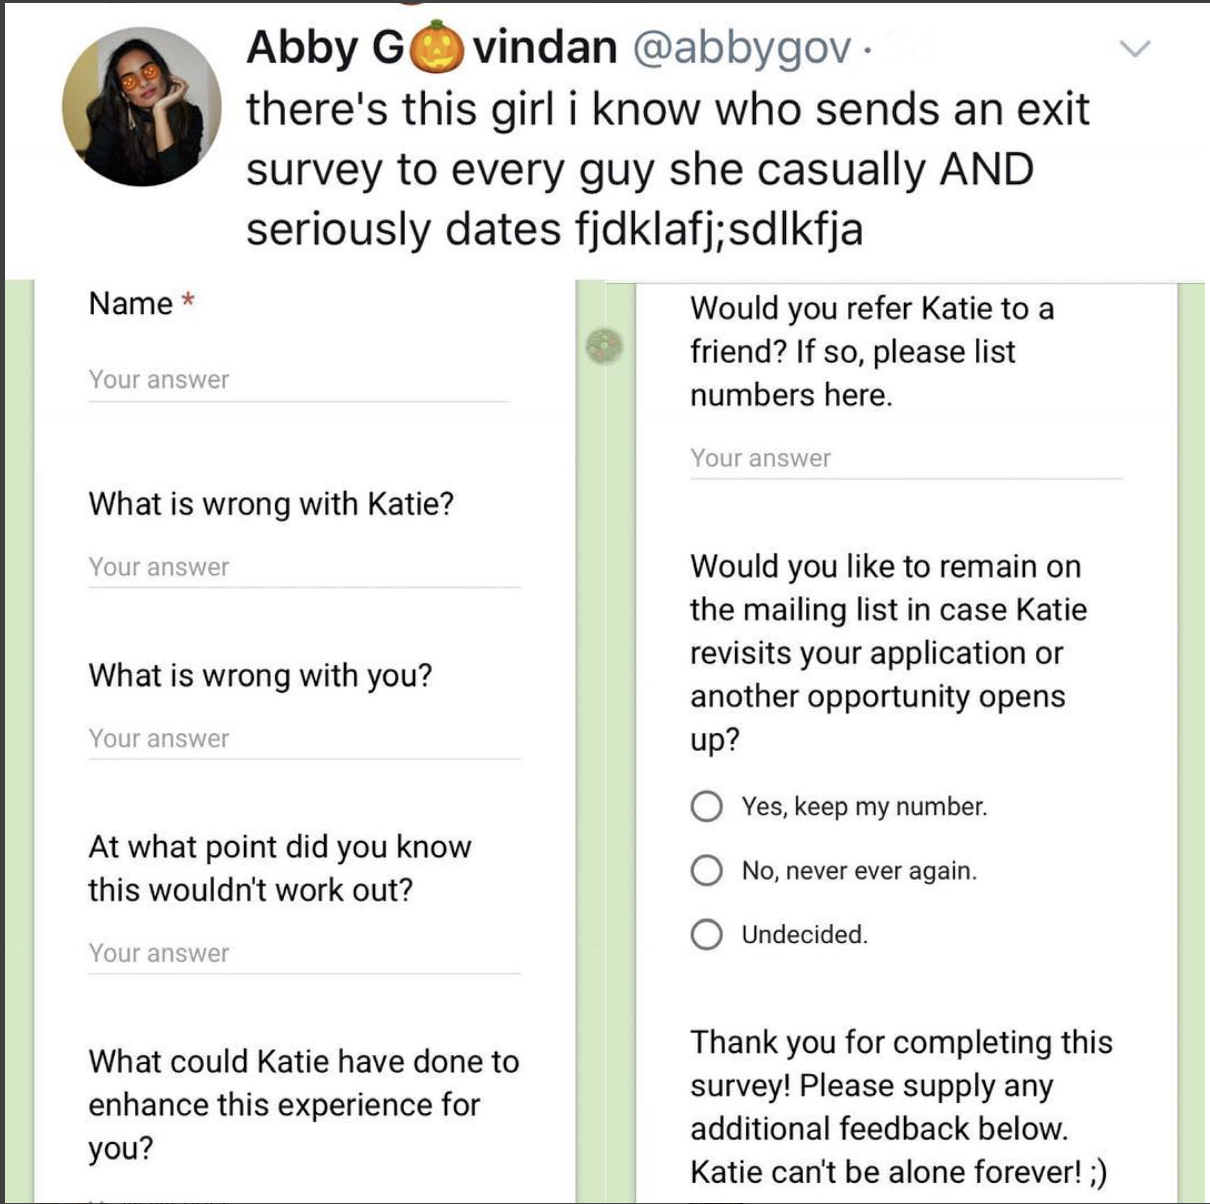 funny pics - document - Abby Govindan . there's this girl i know who sends an exit survey to every guy she casually And seriously dates fjdklafj;sdlkfja Name Would you refer Katie to a friend? If so, please list numbers here. Your answer Your answer What 